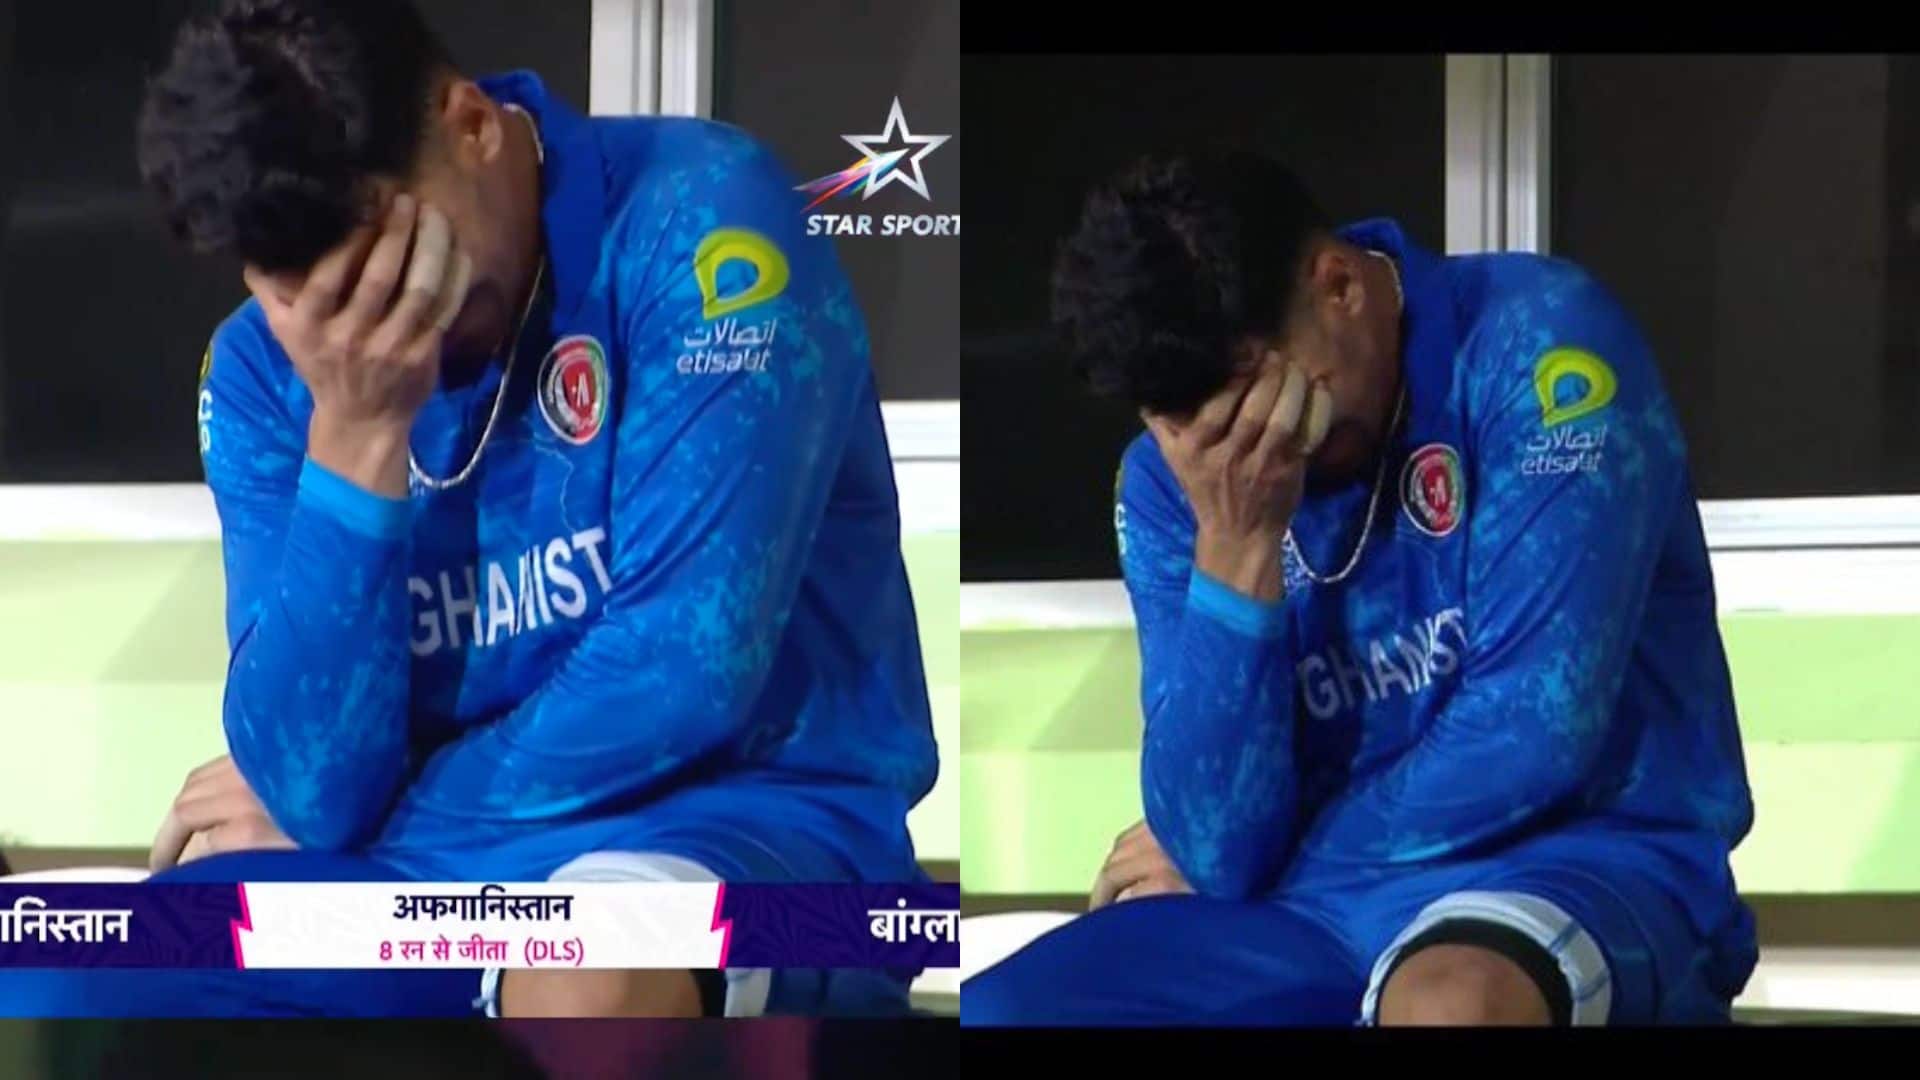 Gurbaz crying in the dressing room [X]